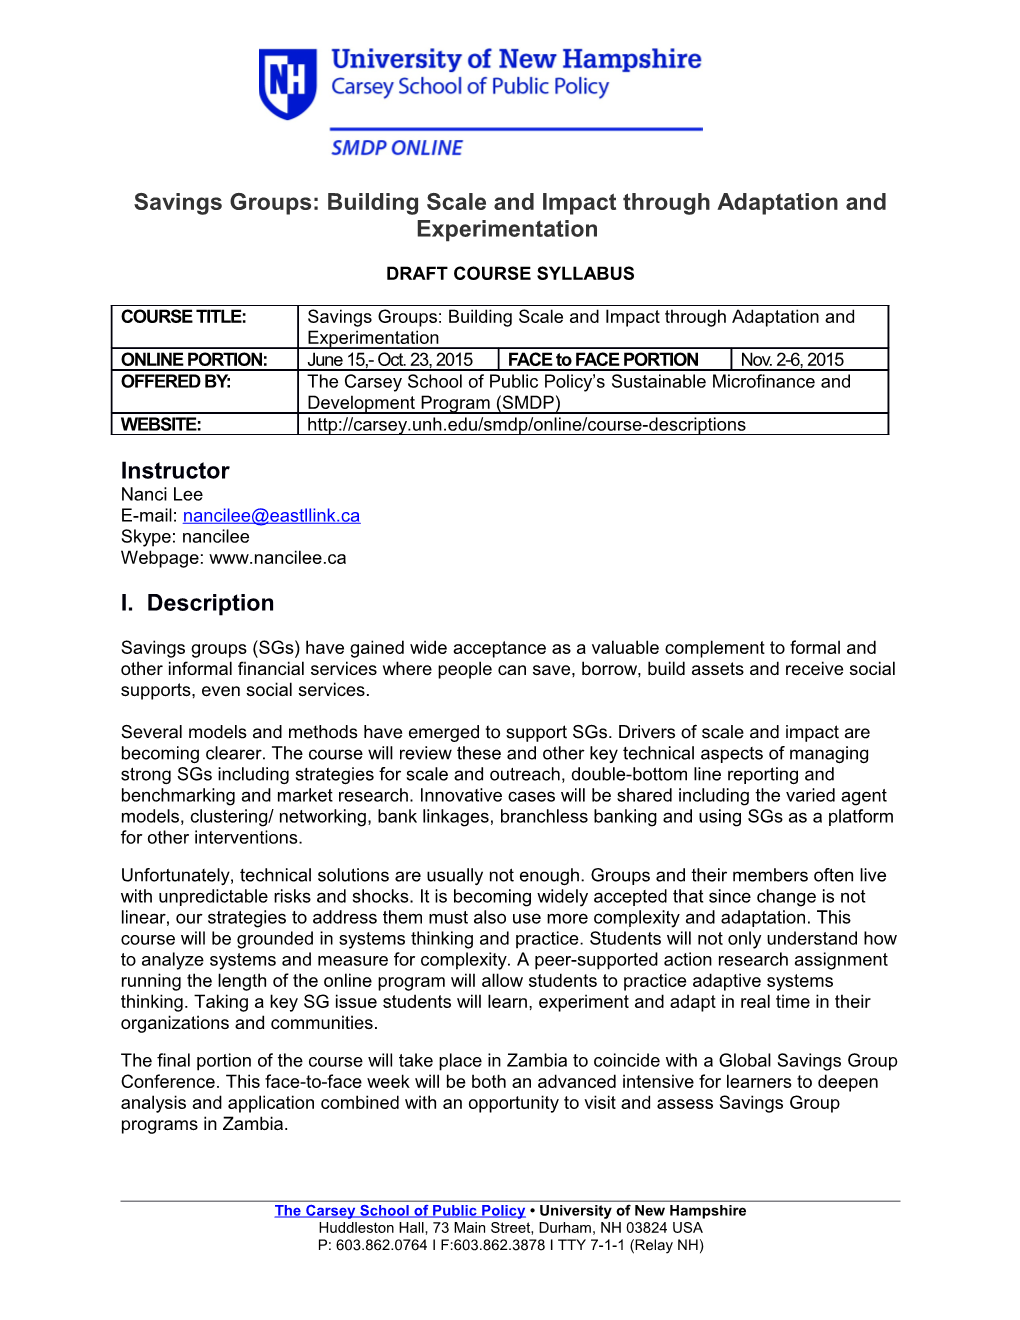 Savings Groups: Building Scale and Impact Through Adaptation and Experimentation